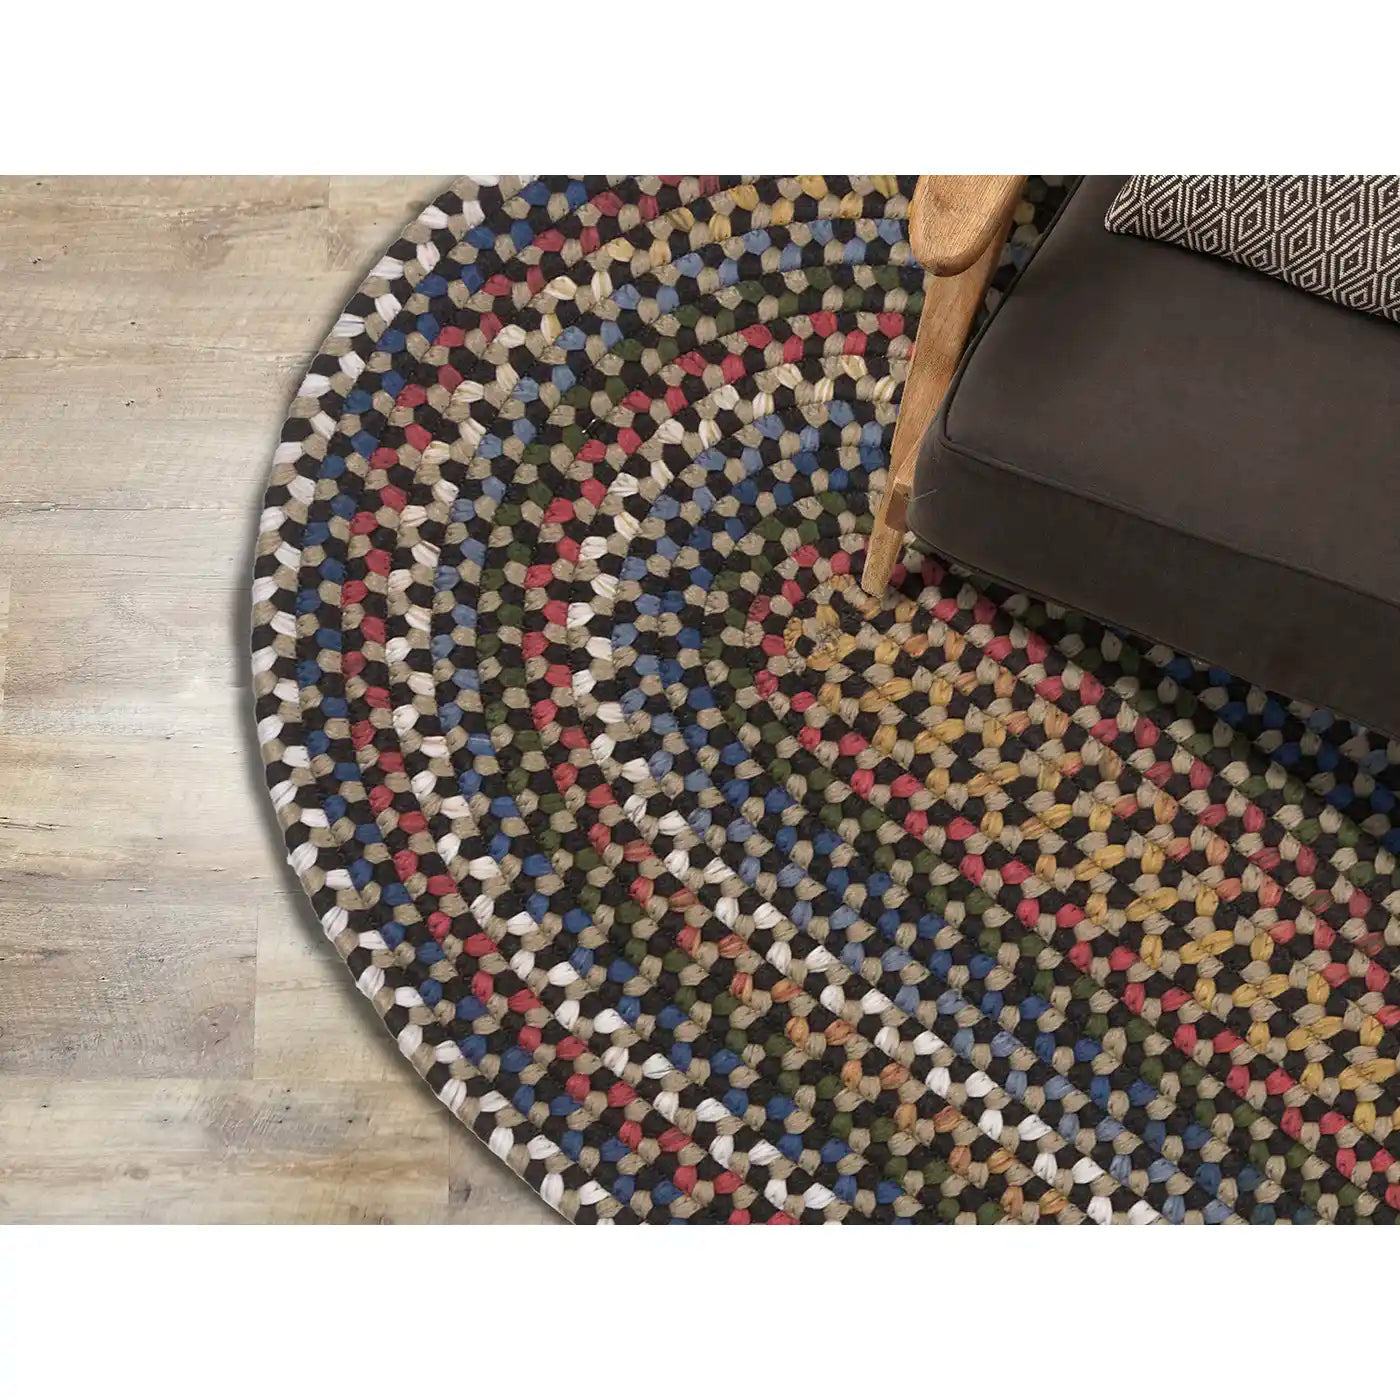 Colonial Mills Wayland Red Handcraft Braided Runner Rug in Braided & Farmhouse/Rustic style.